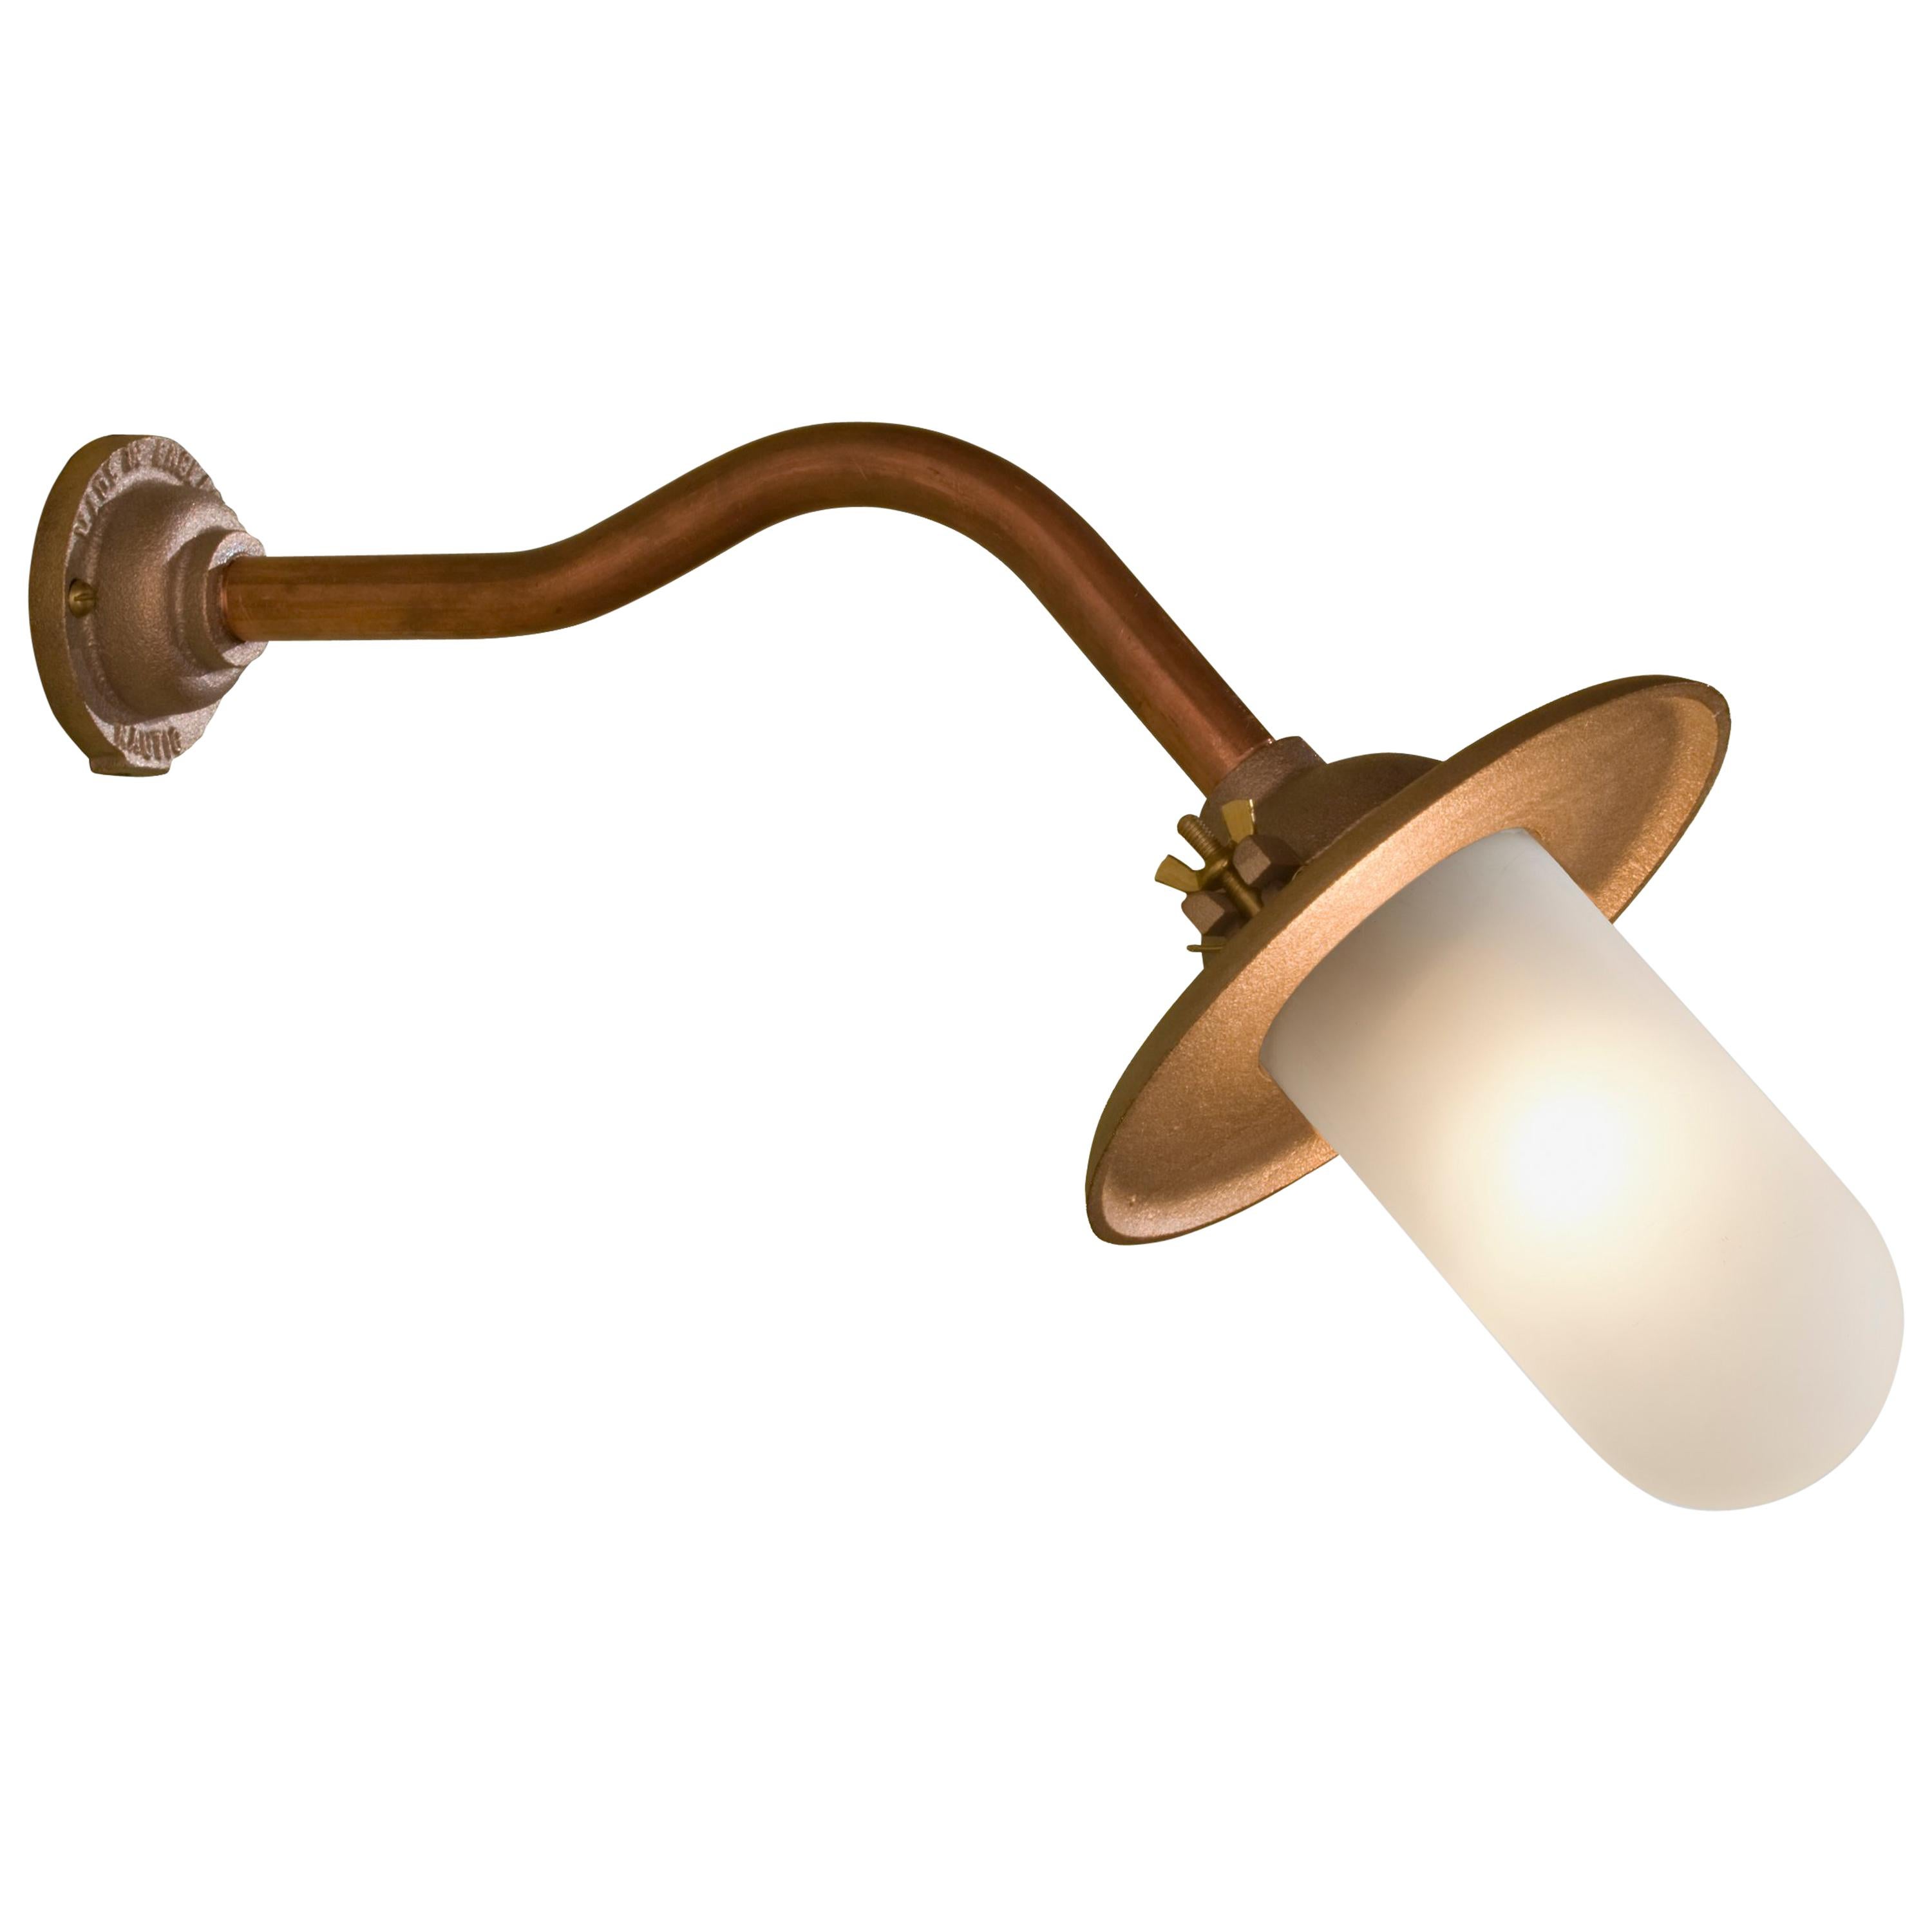 Wall light in copper with canted 45° arm, reflector and clear or frosted glass. For outdoor use (IP44).

Lamp LED 230V E27 4W 2700K Retro A60. Main power 230V 50Hz.